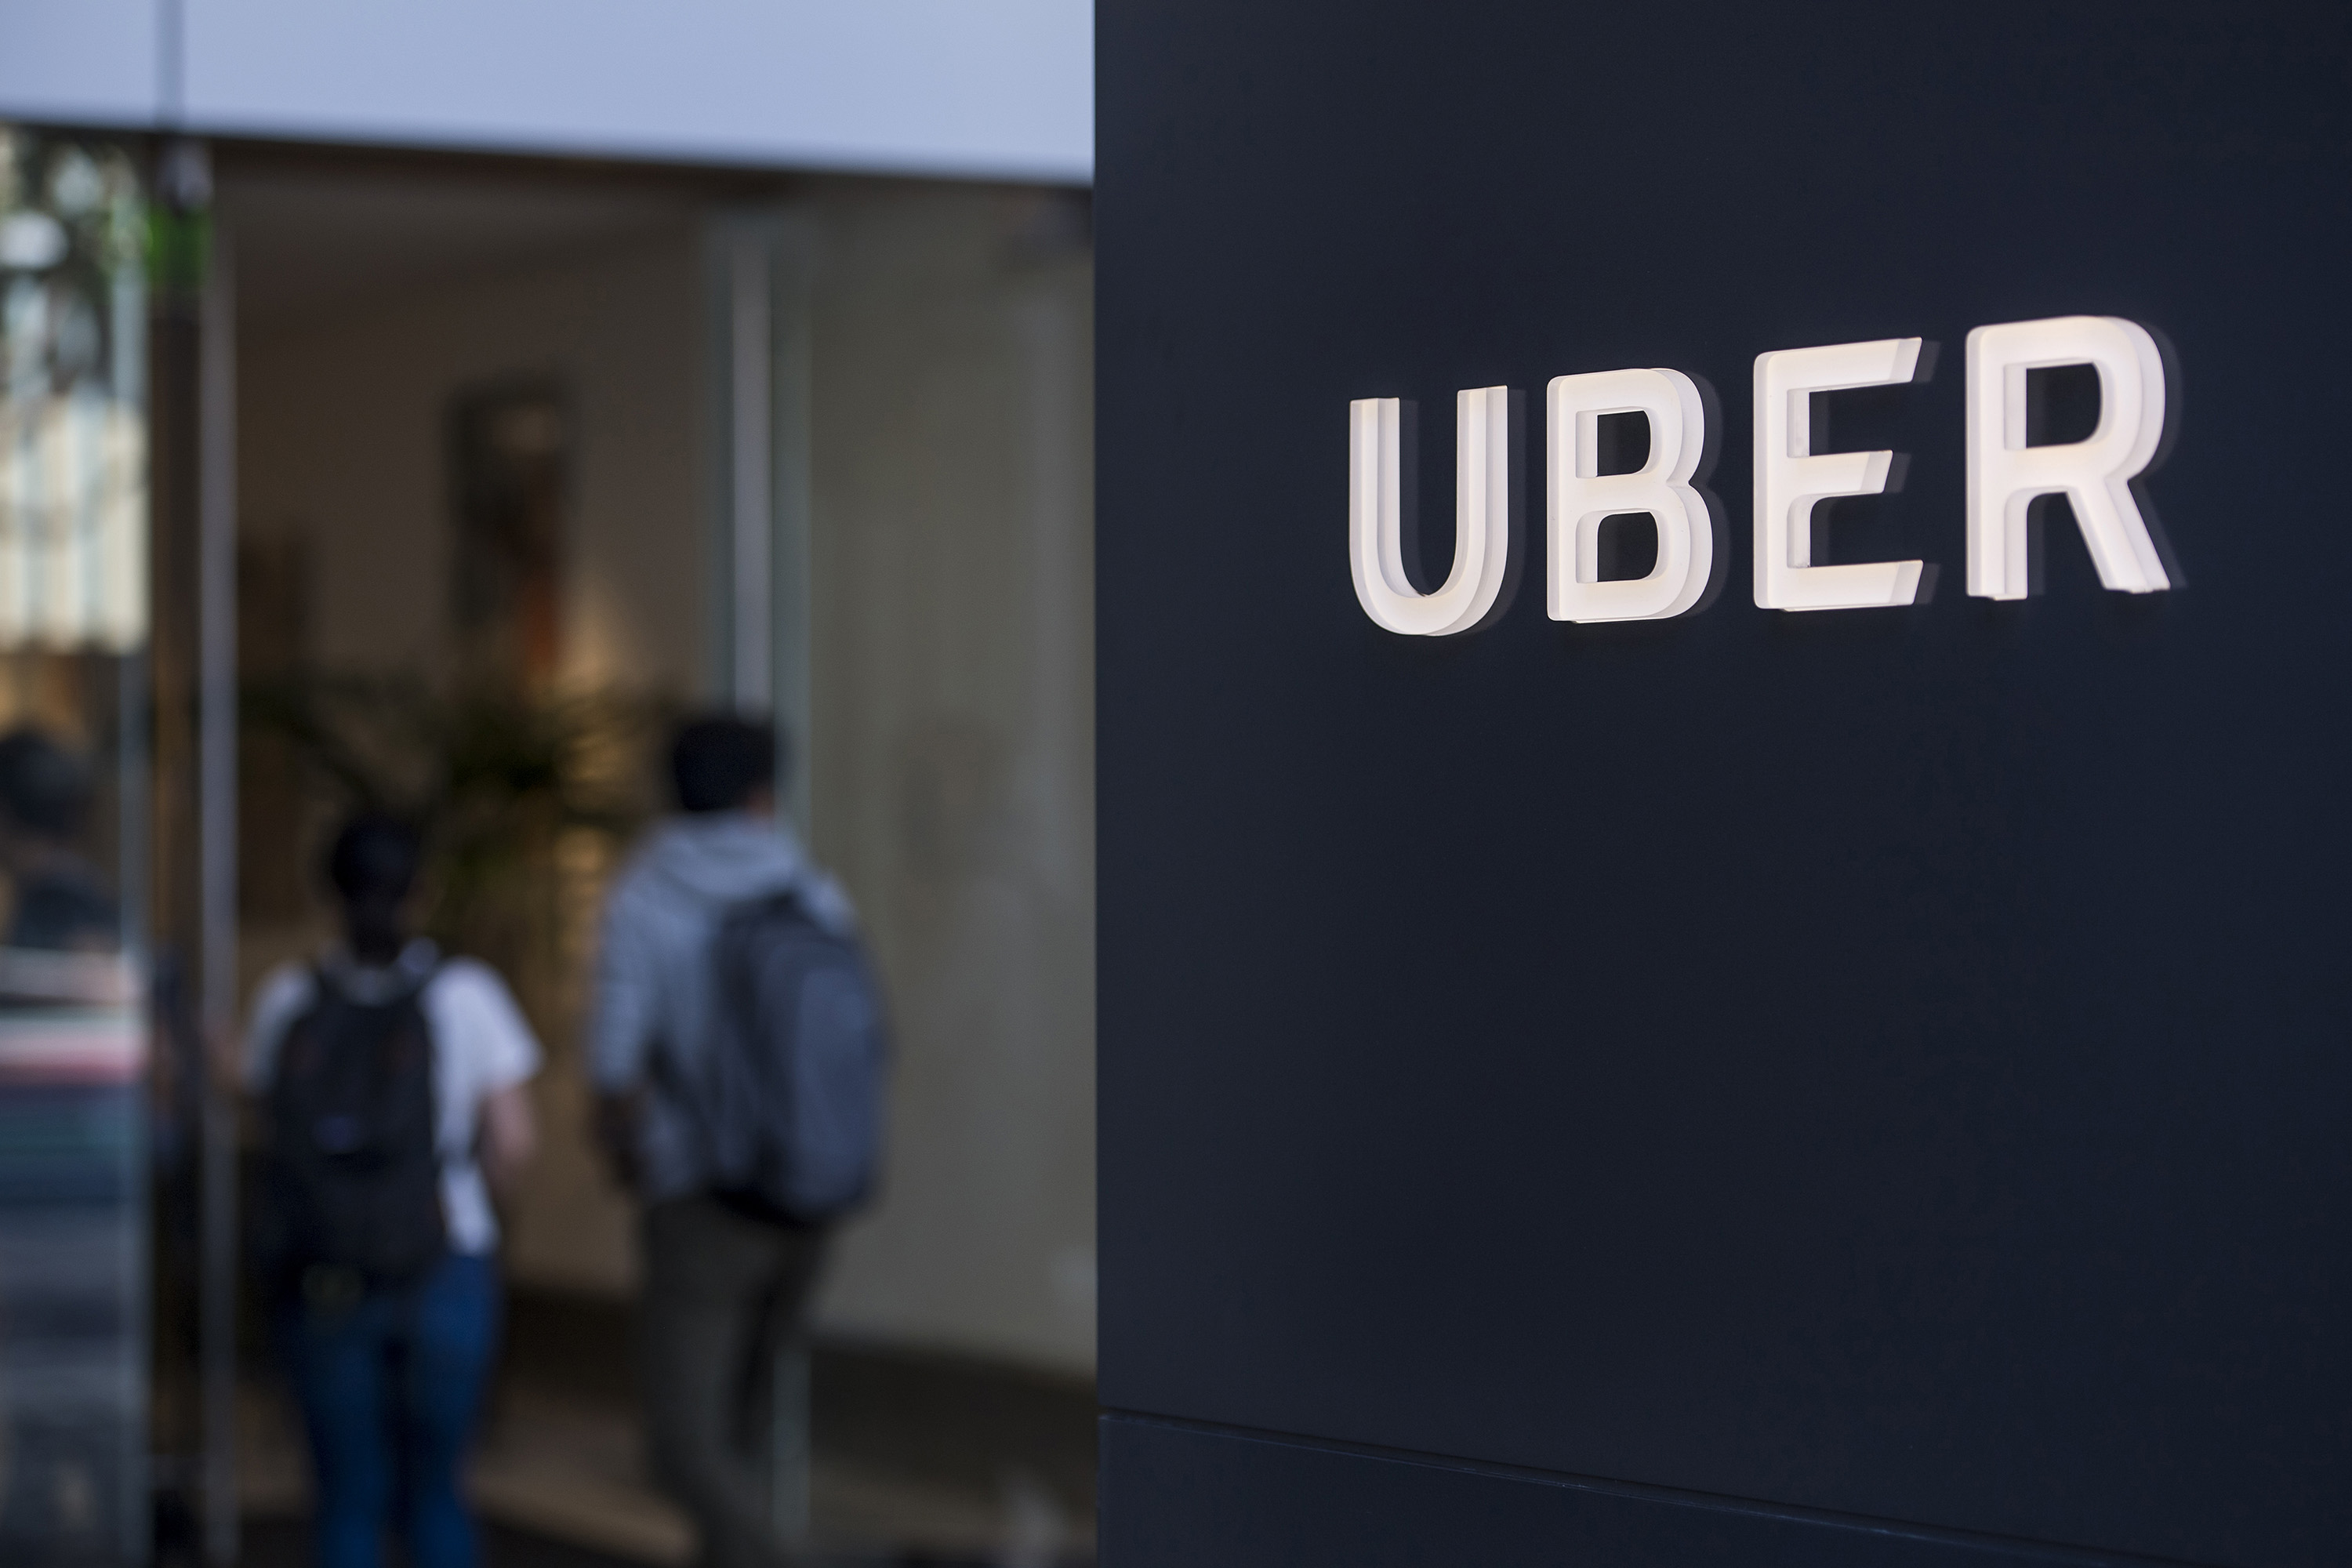 Breaking: Uber has offered CEO role to Dara Khosrowshahi from Expedia